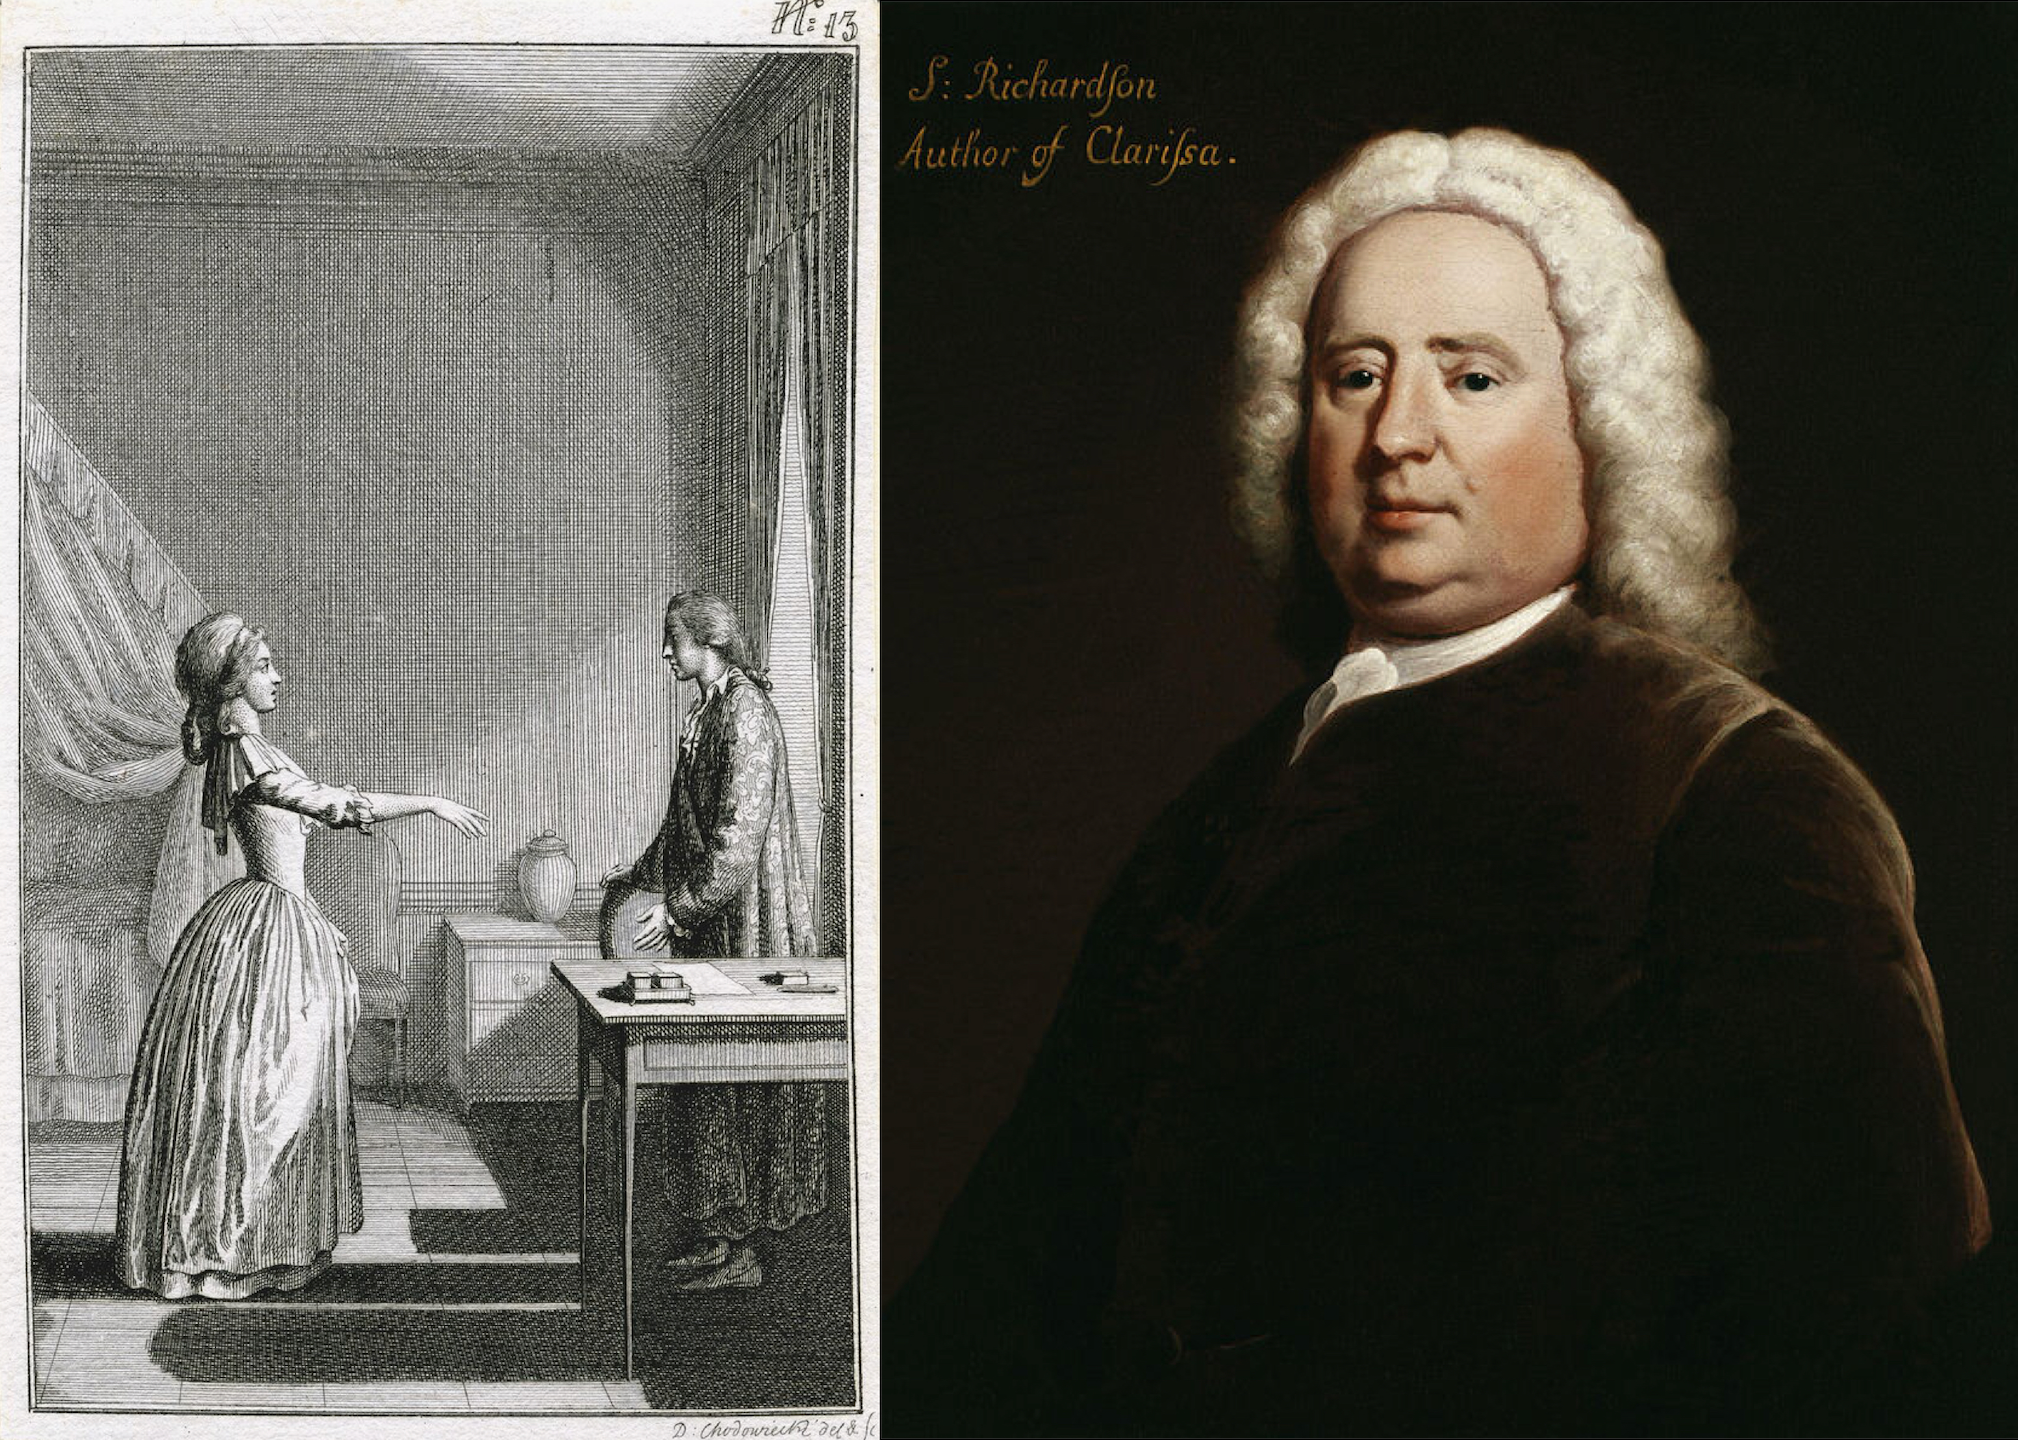 Portrait of Samuel Richardson, 1750, by Joseph Highmore, and an illustration from an 1800 French edition, where ‘Clarissa stands before Lovelace’, by Daniel Chodowiecki